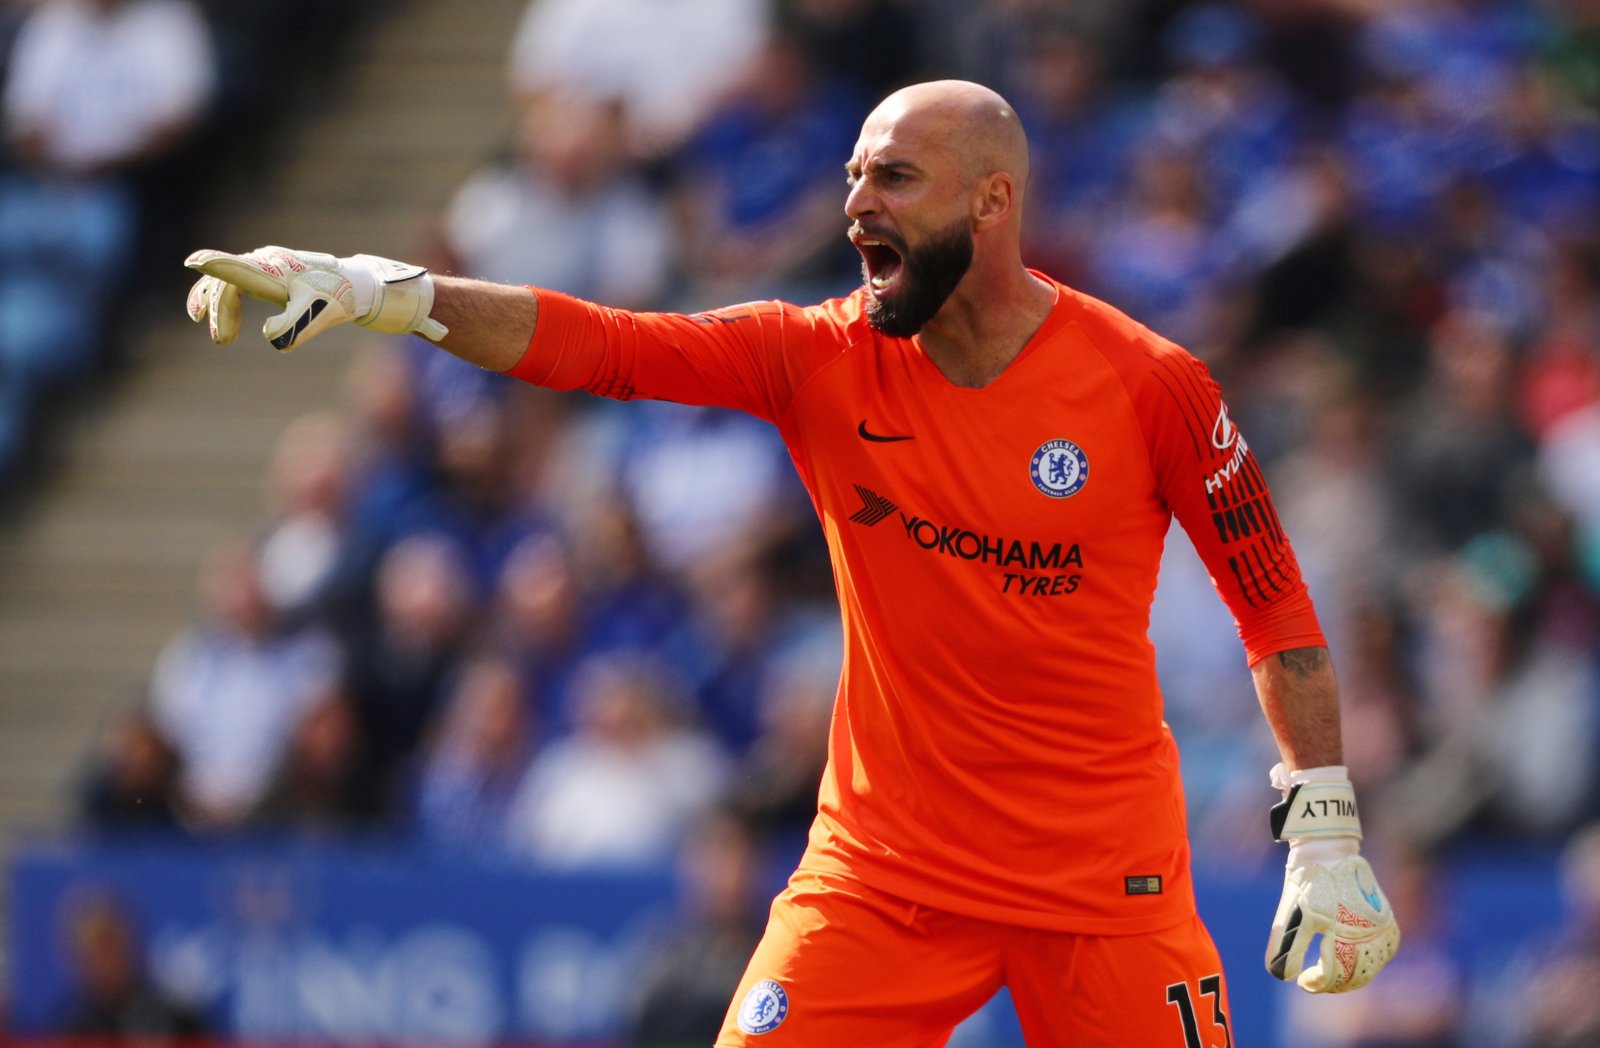 Willy Caballero is expected to replace Mendy in goal